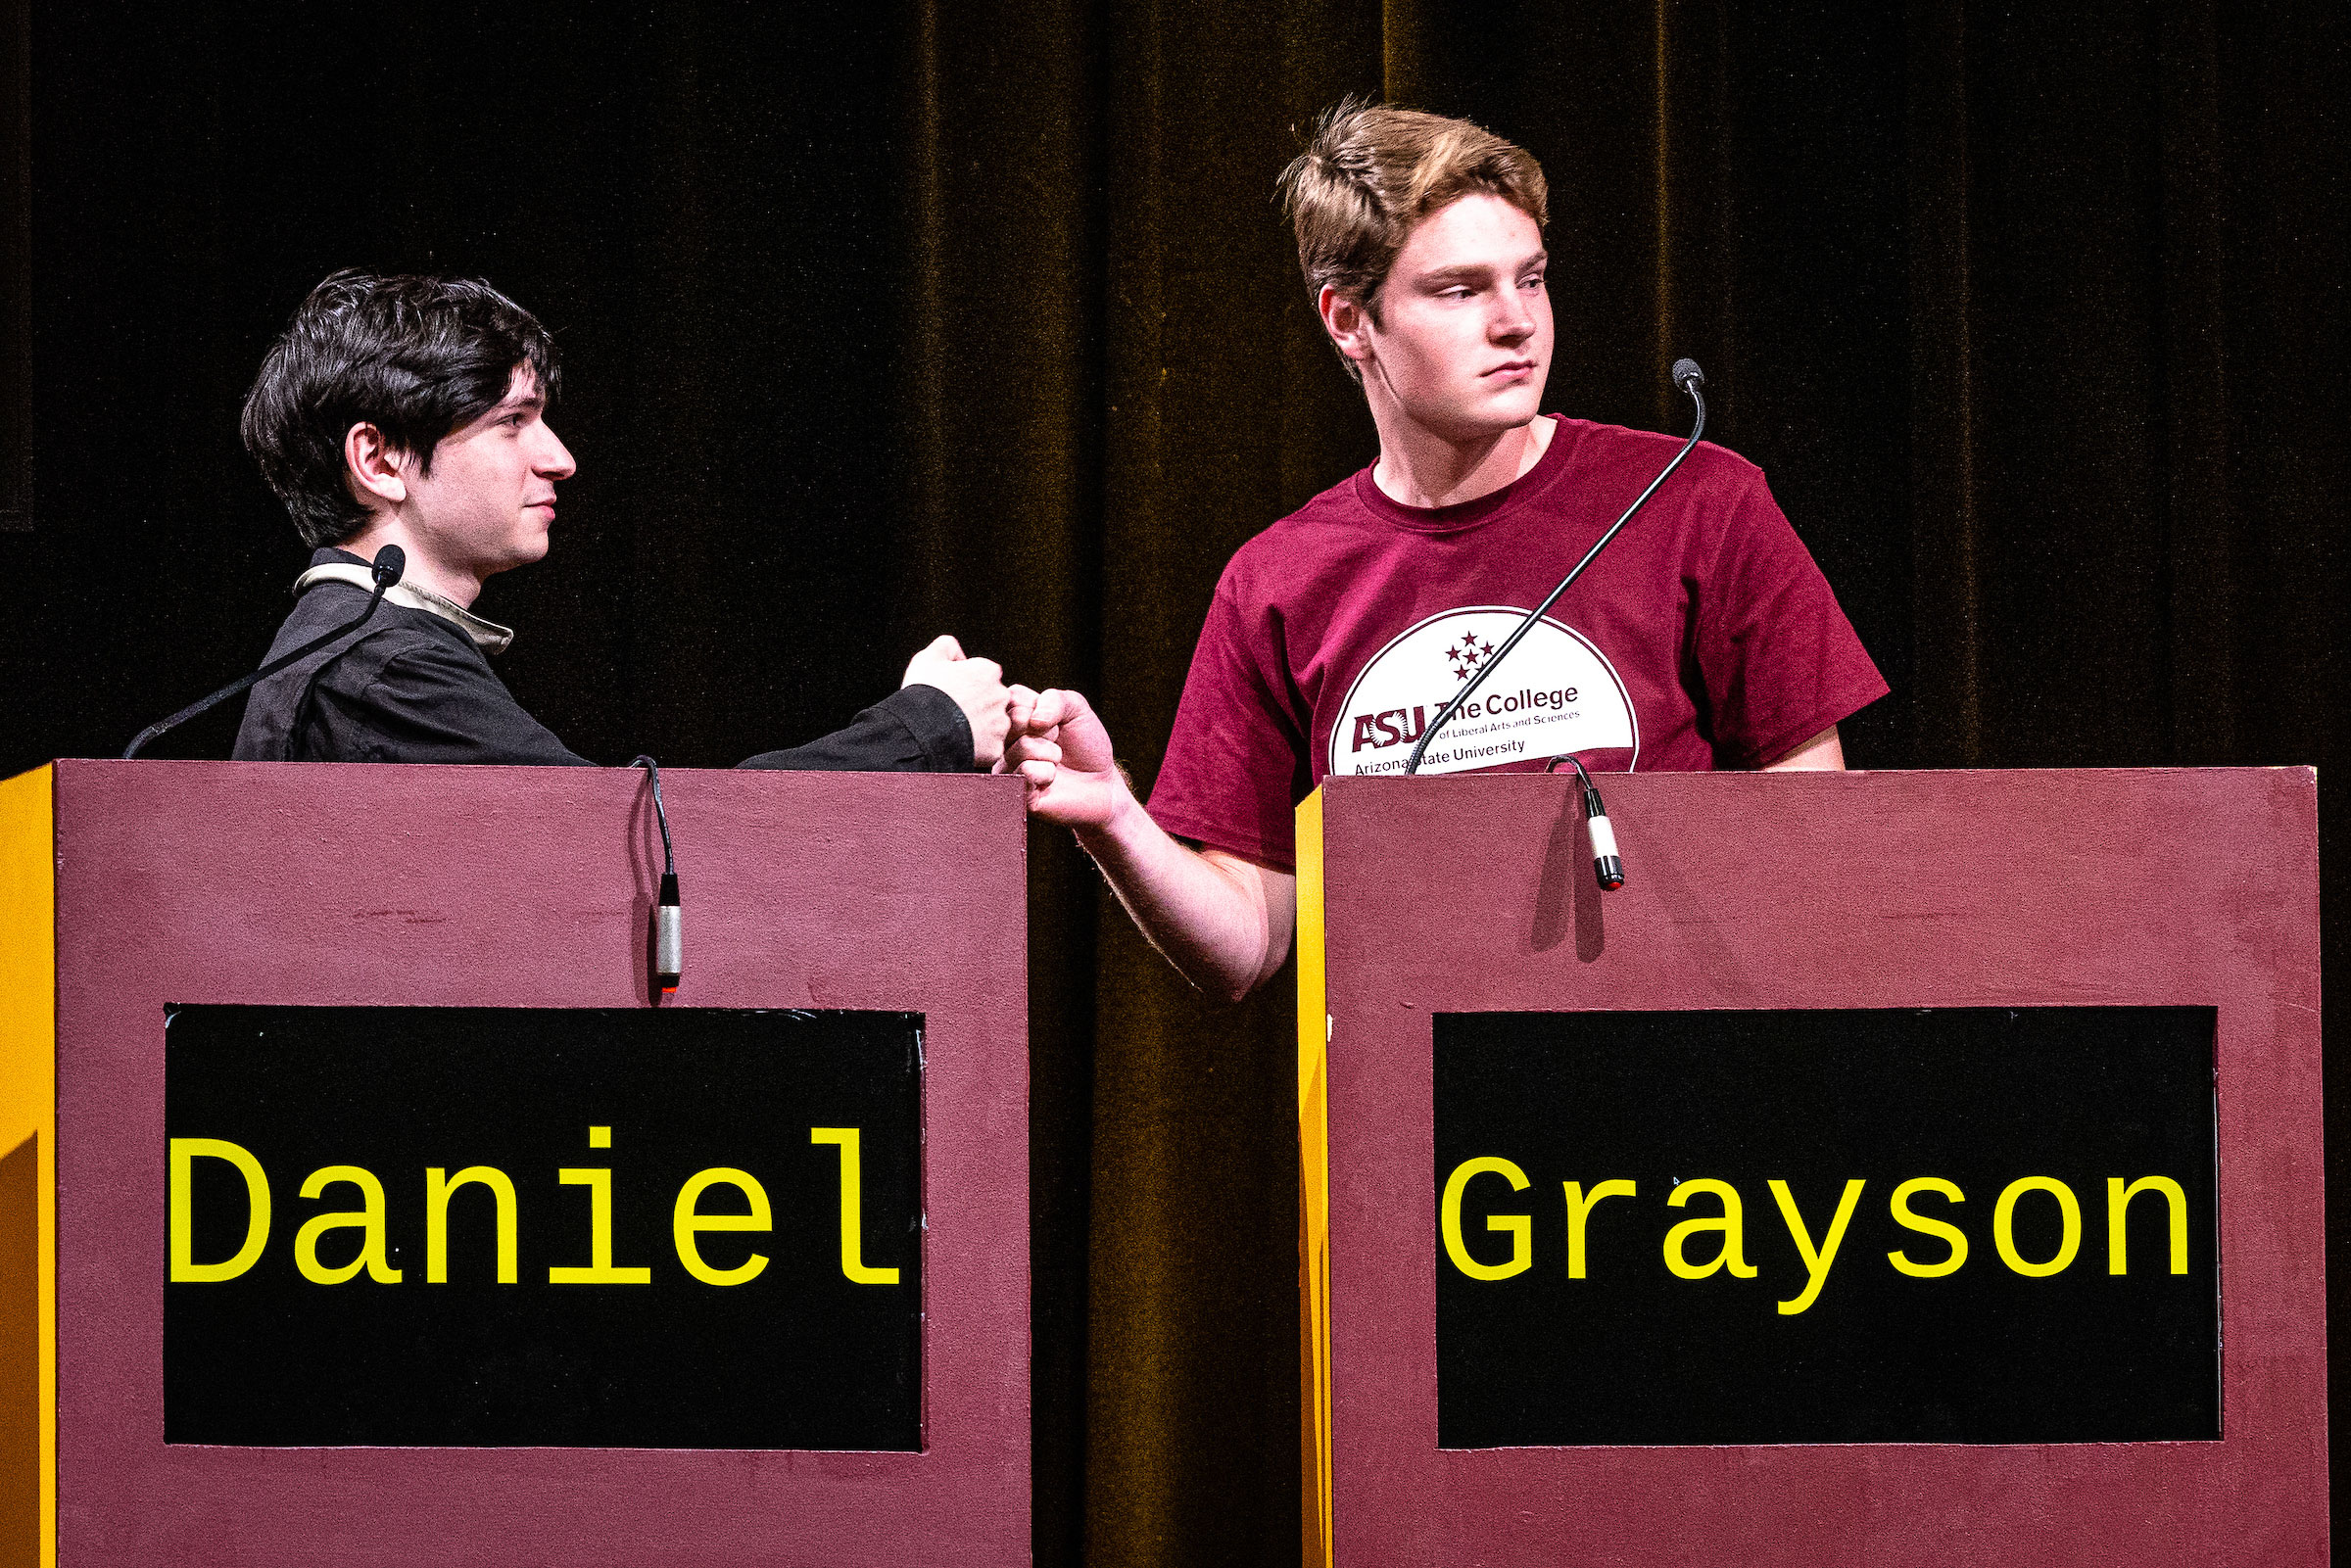 Two students fist-bump while standing behind lecterns.